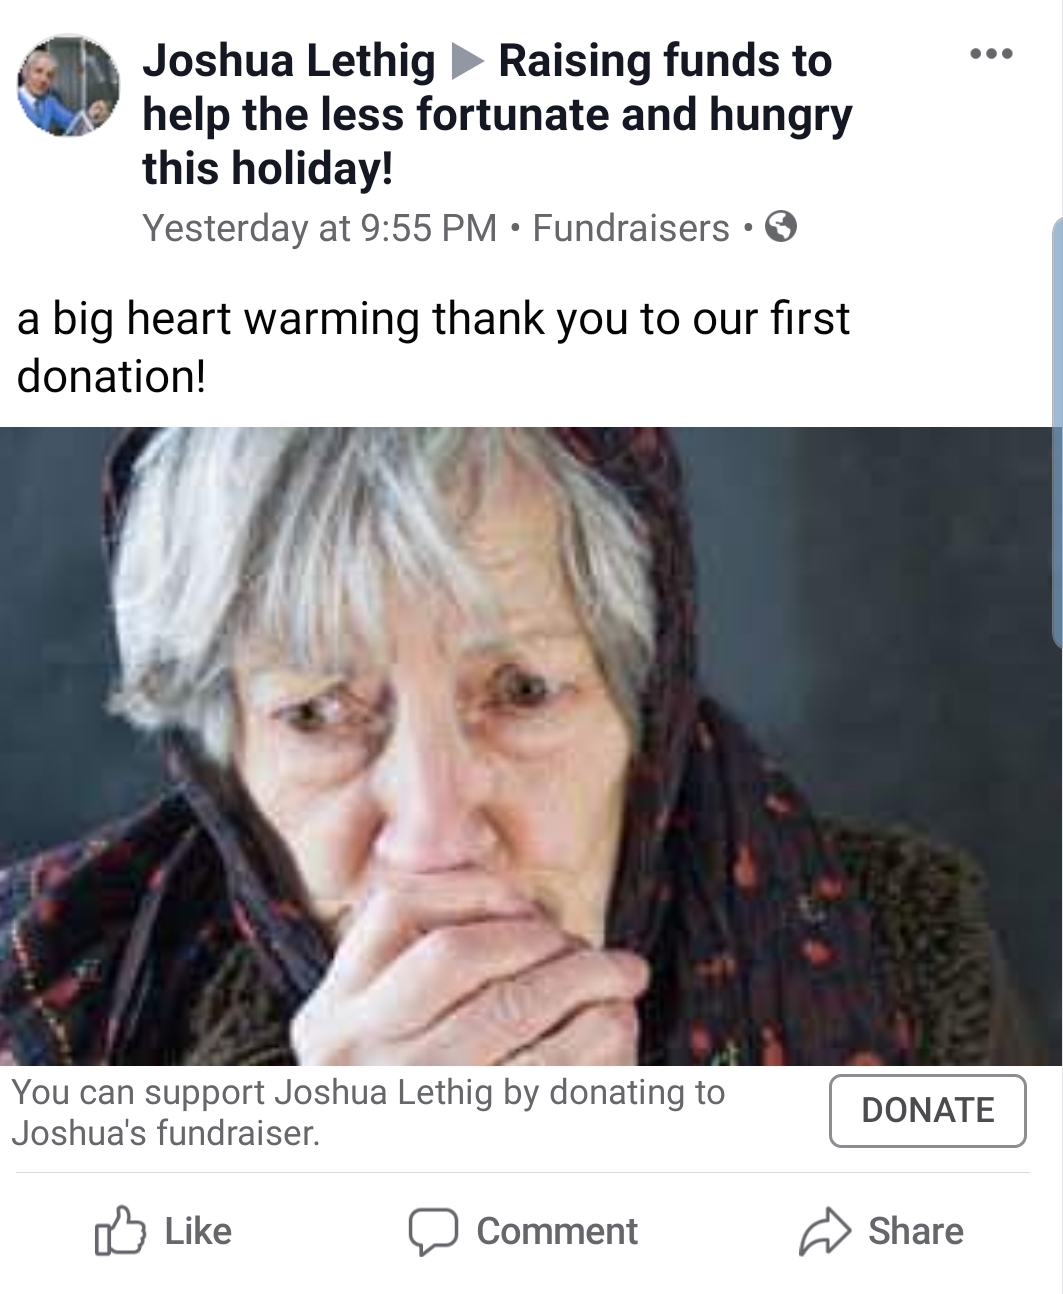 photo caption - Joshua Lethig Raising funds to help the less fortunate and hungry this holiday! Yesterday at . Fundraisers. a big heart warming thank you to our first donation! You can support Joshua Lethig by donating to Joshua's fundraiser. Donate Comme